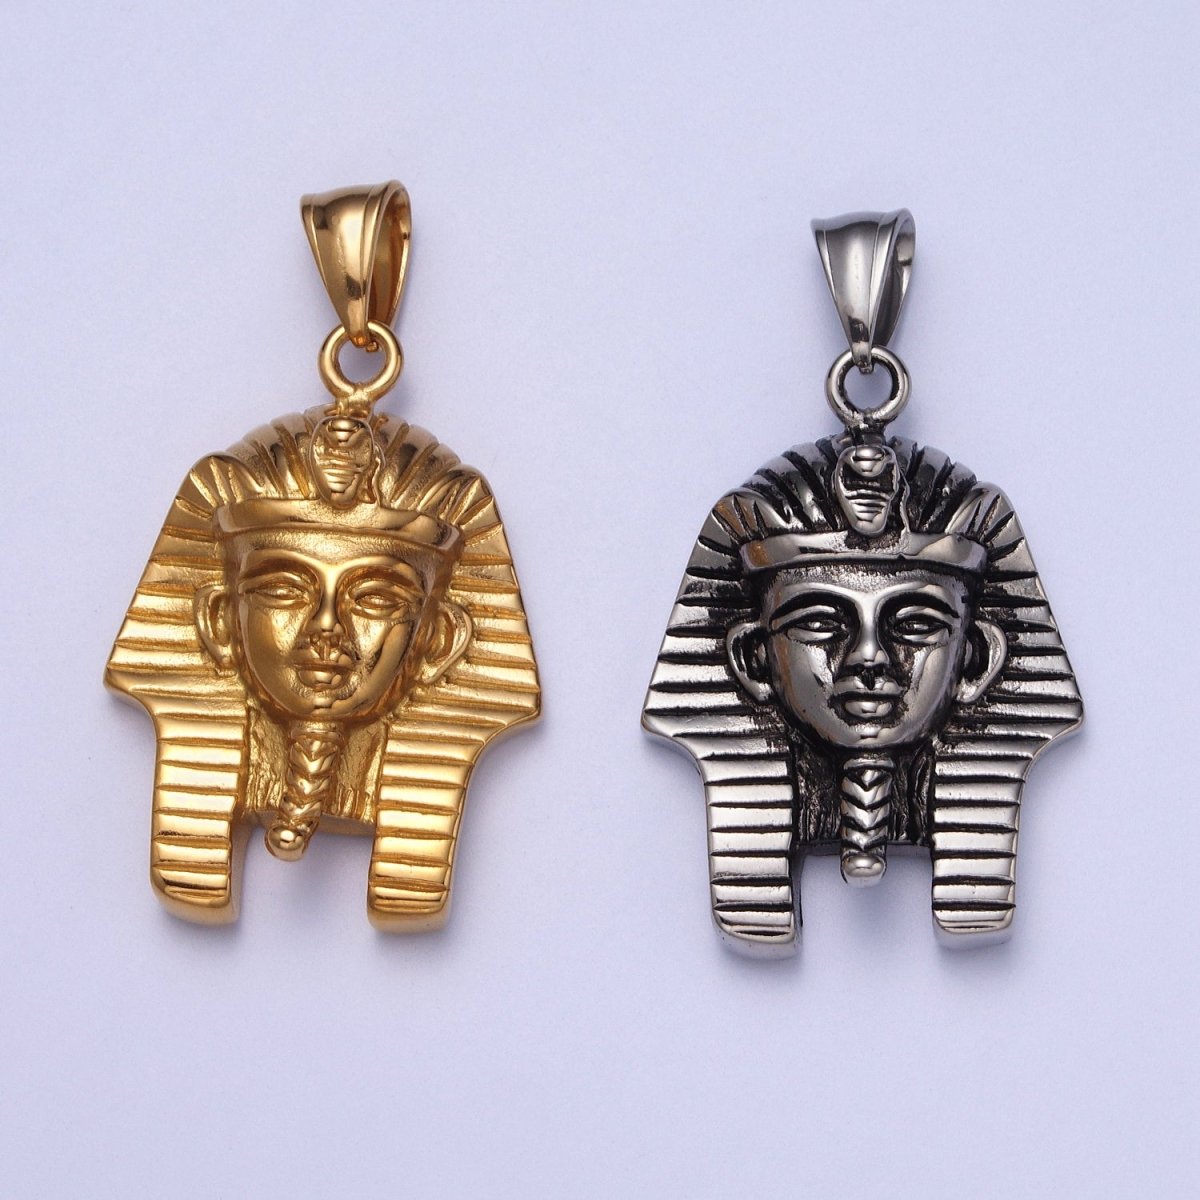 Stainless Steel Ancient Egyptian Pharaoh King Mummy Pendant in Gold & Silver J-448 J-451 - DLUXCA